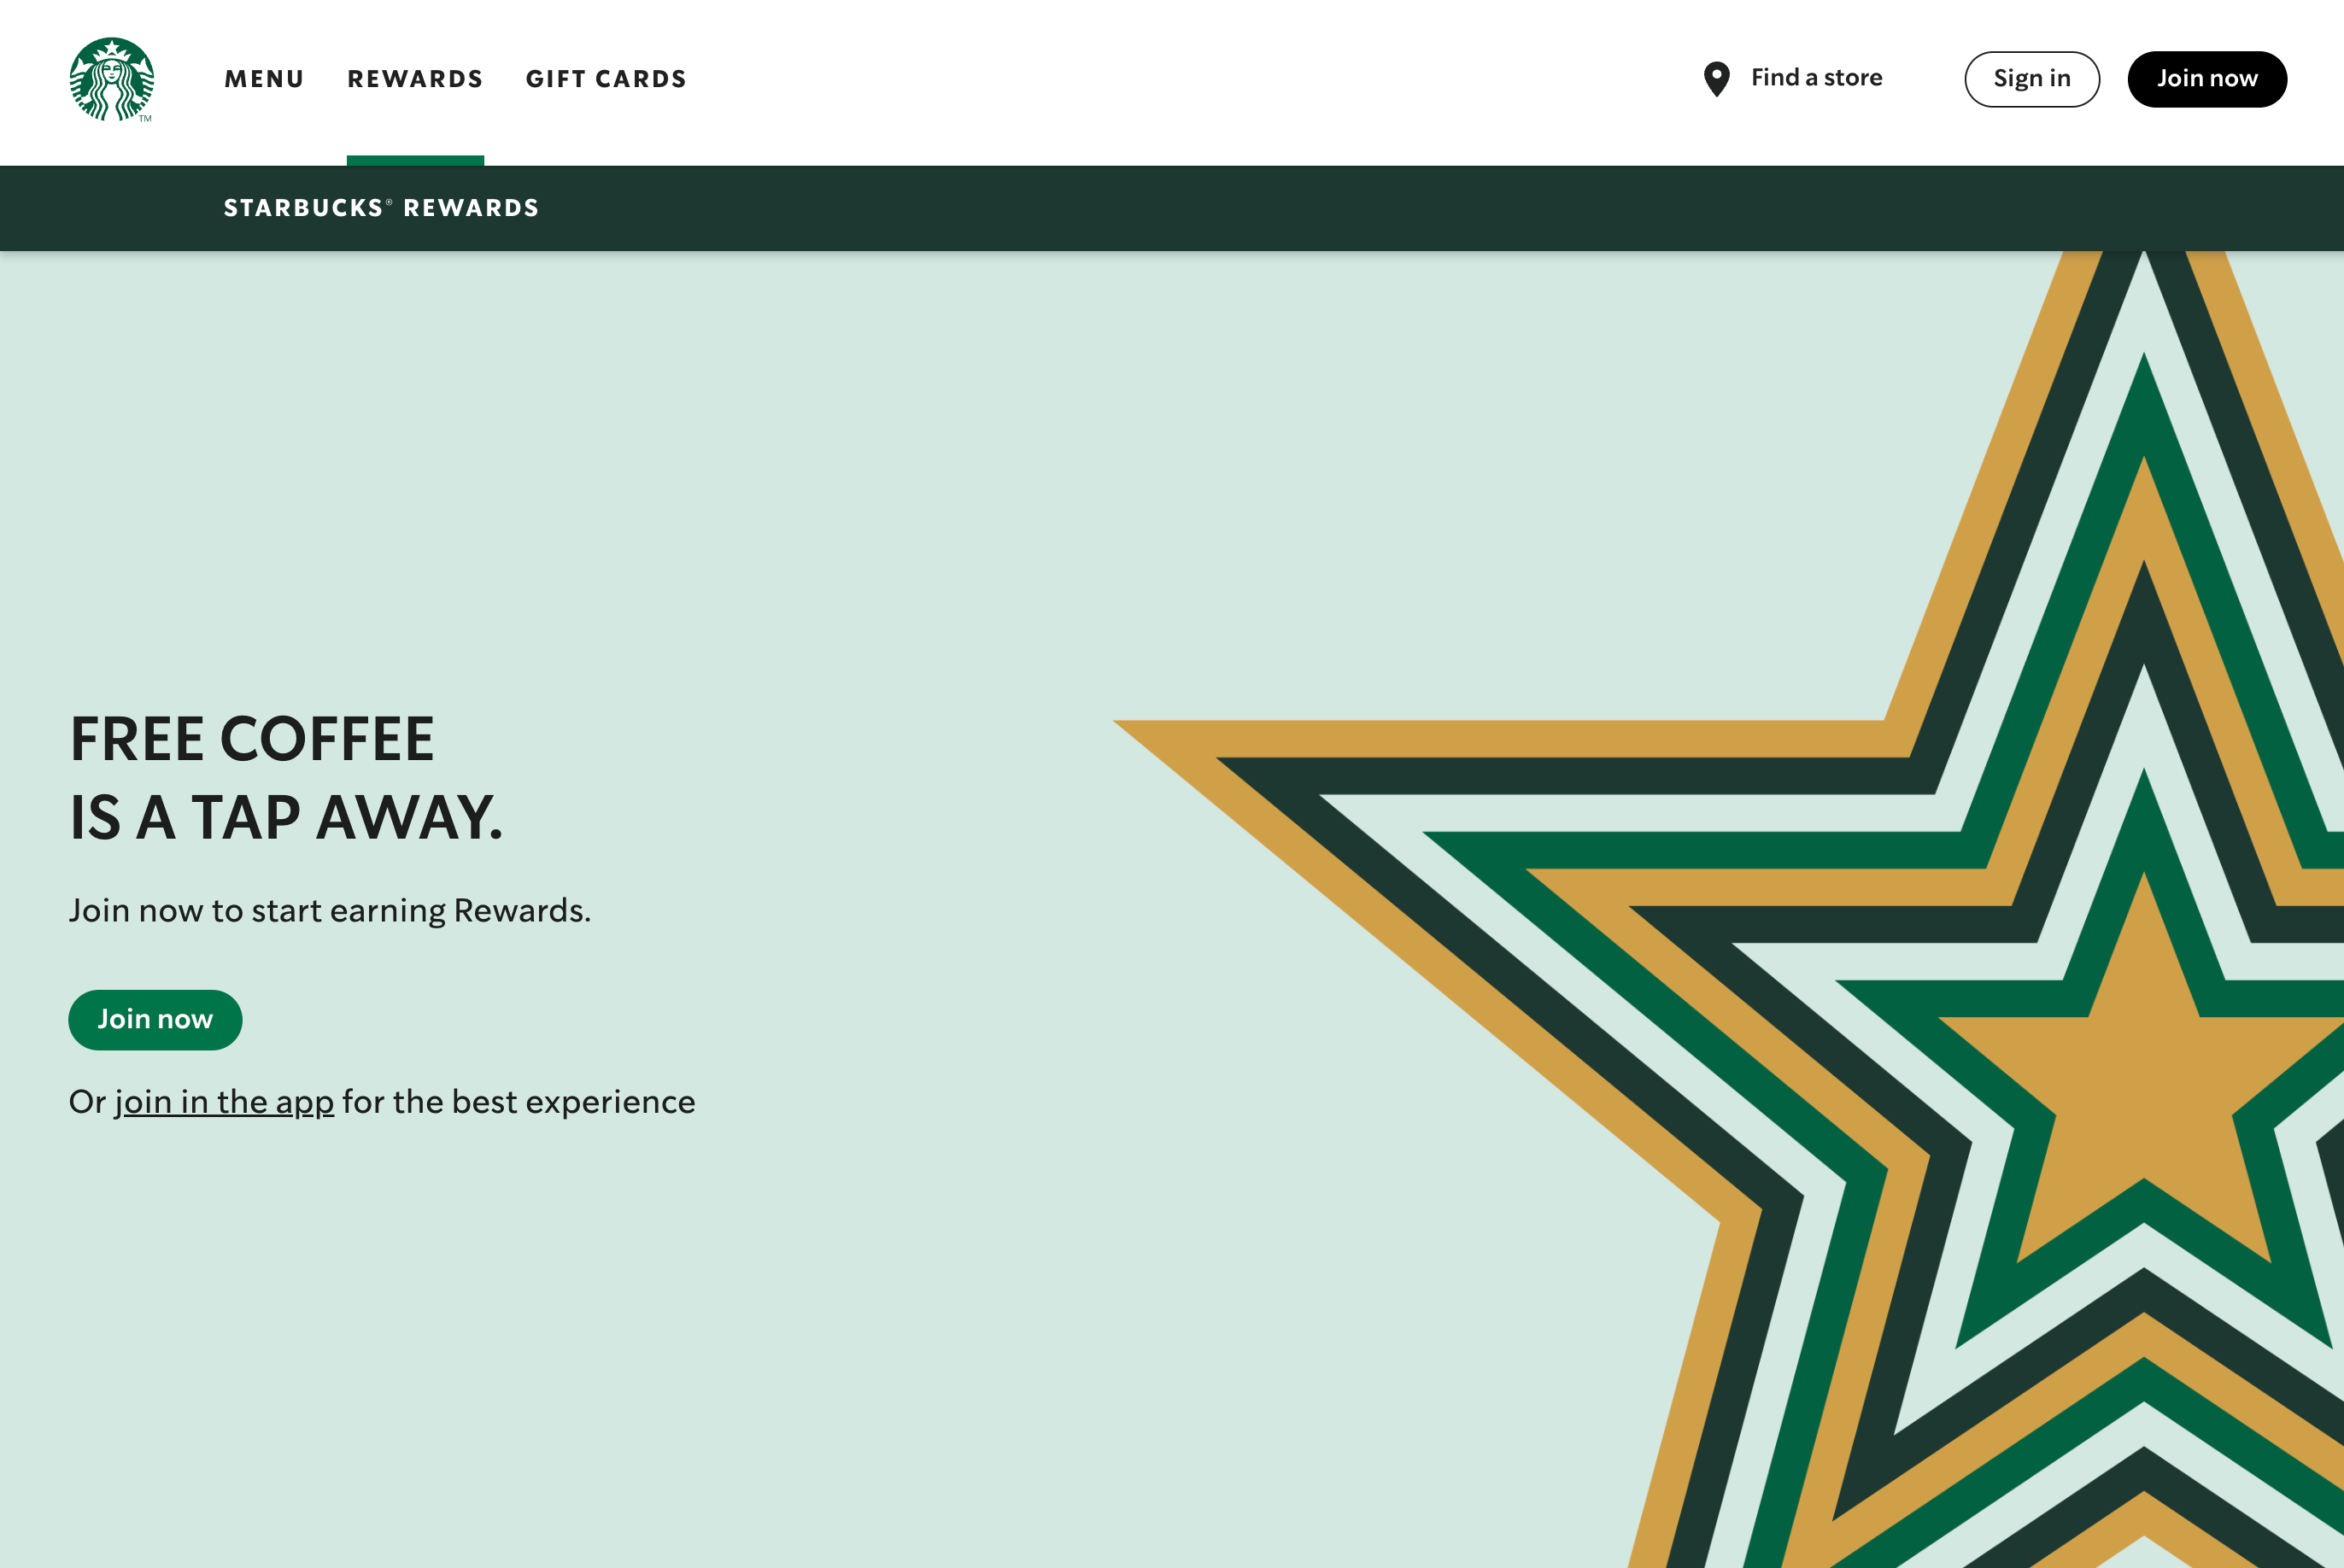 A screenshot of Starbucks’ rewards program explainer page: Free coffee is a tap away. Join now to start earning rewards. There is a green Join Now call-to-action button and a large star on the righthand side of the page designed in yellow and multiple shades of green. 